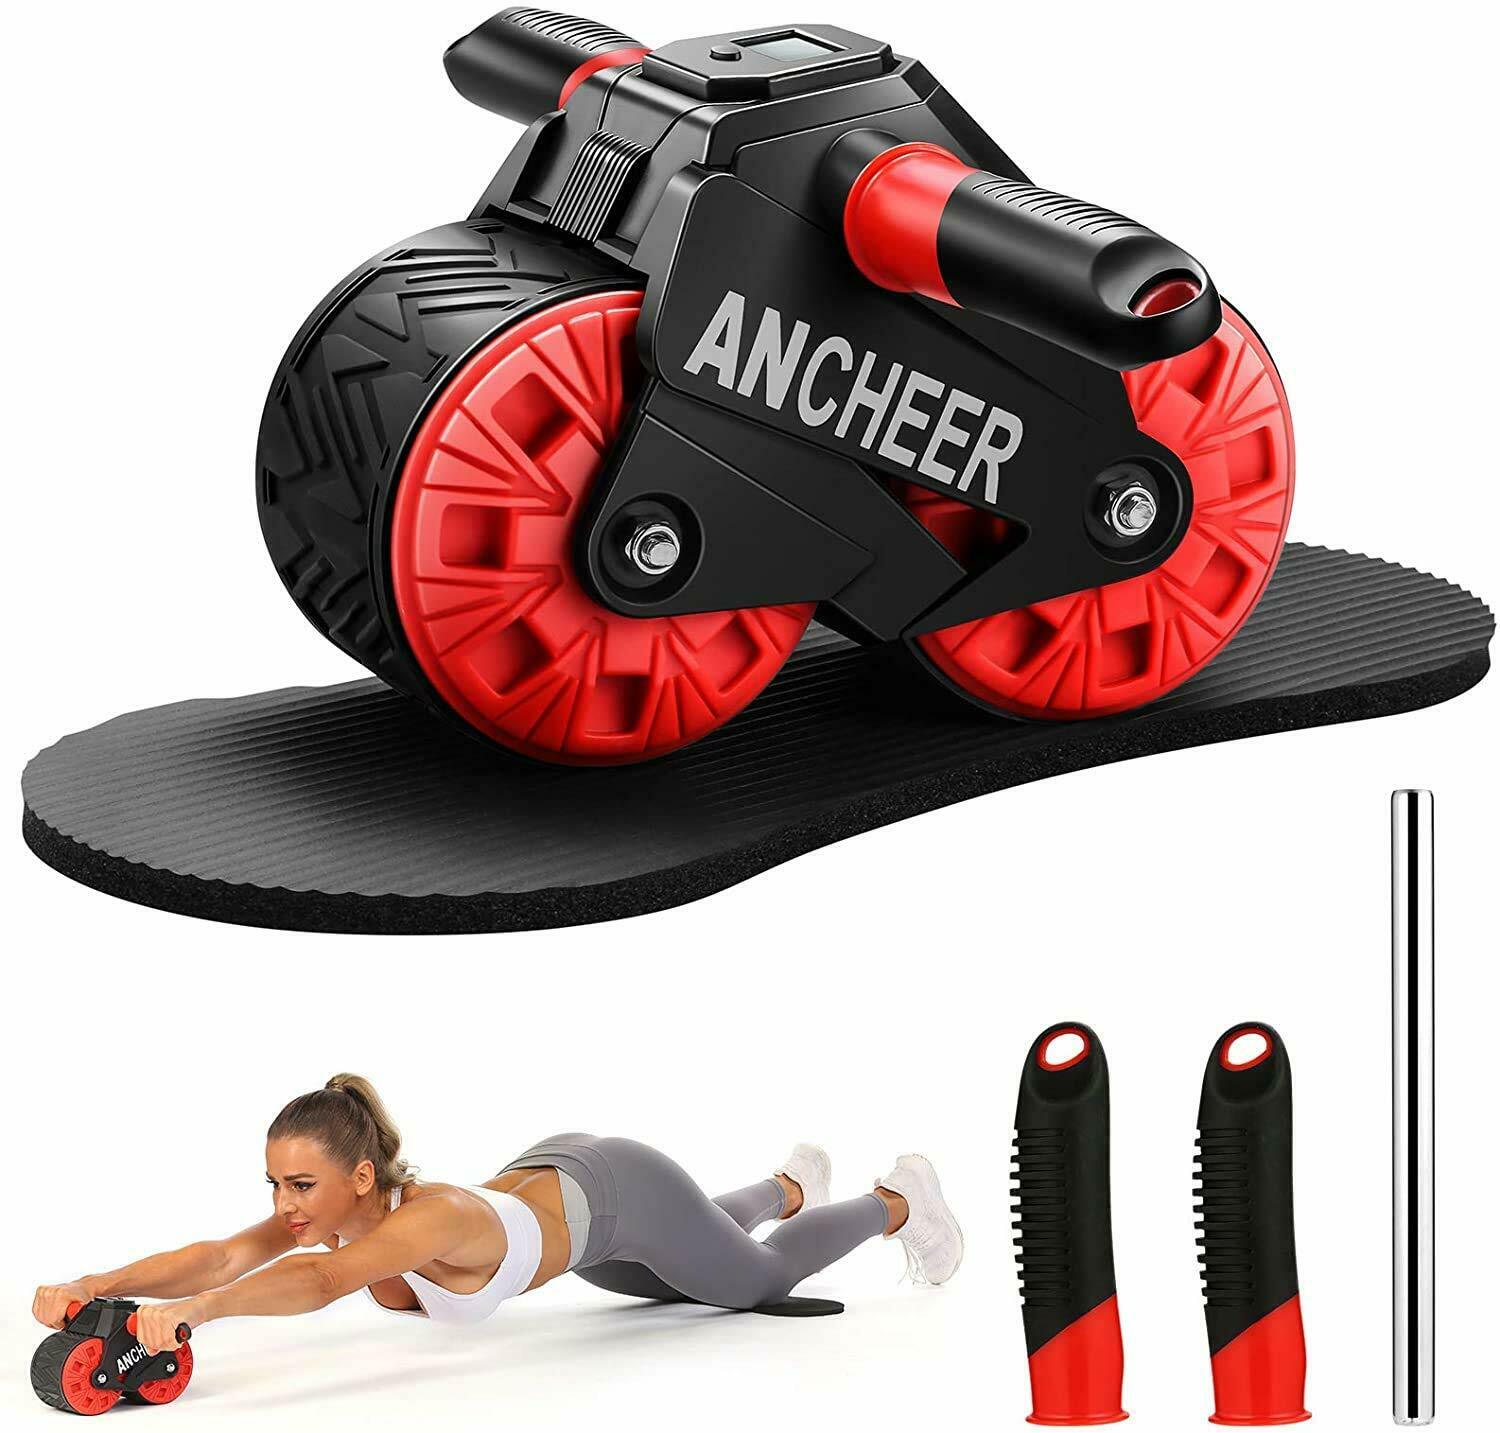 Image 1 - Ab Roller Wheel for Abs Workout with Knee Pad Mat and Intelligent Display^